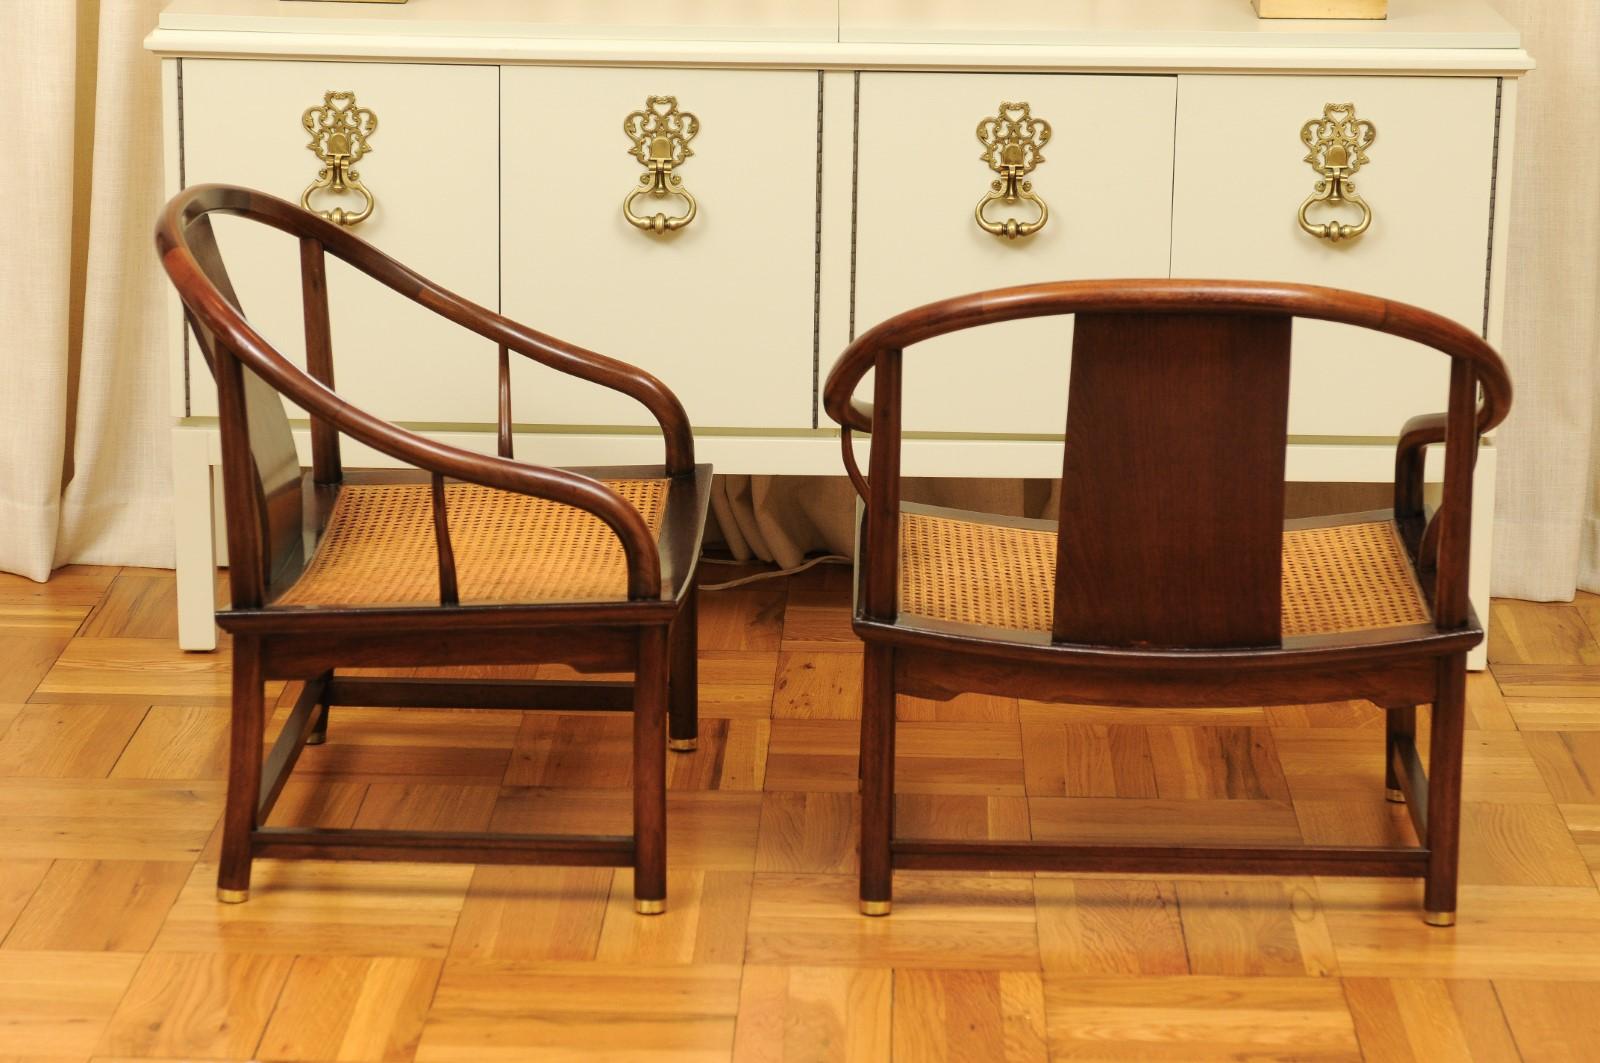 Stunning Restored Pair of Walnut Cane Loungers by Michael Taylor, circa 1960 For Sale 6